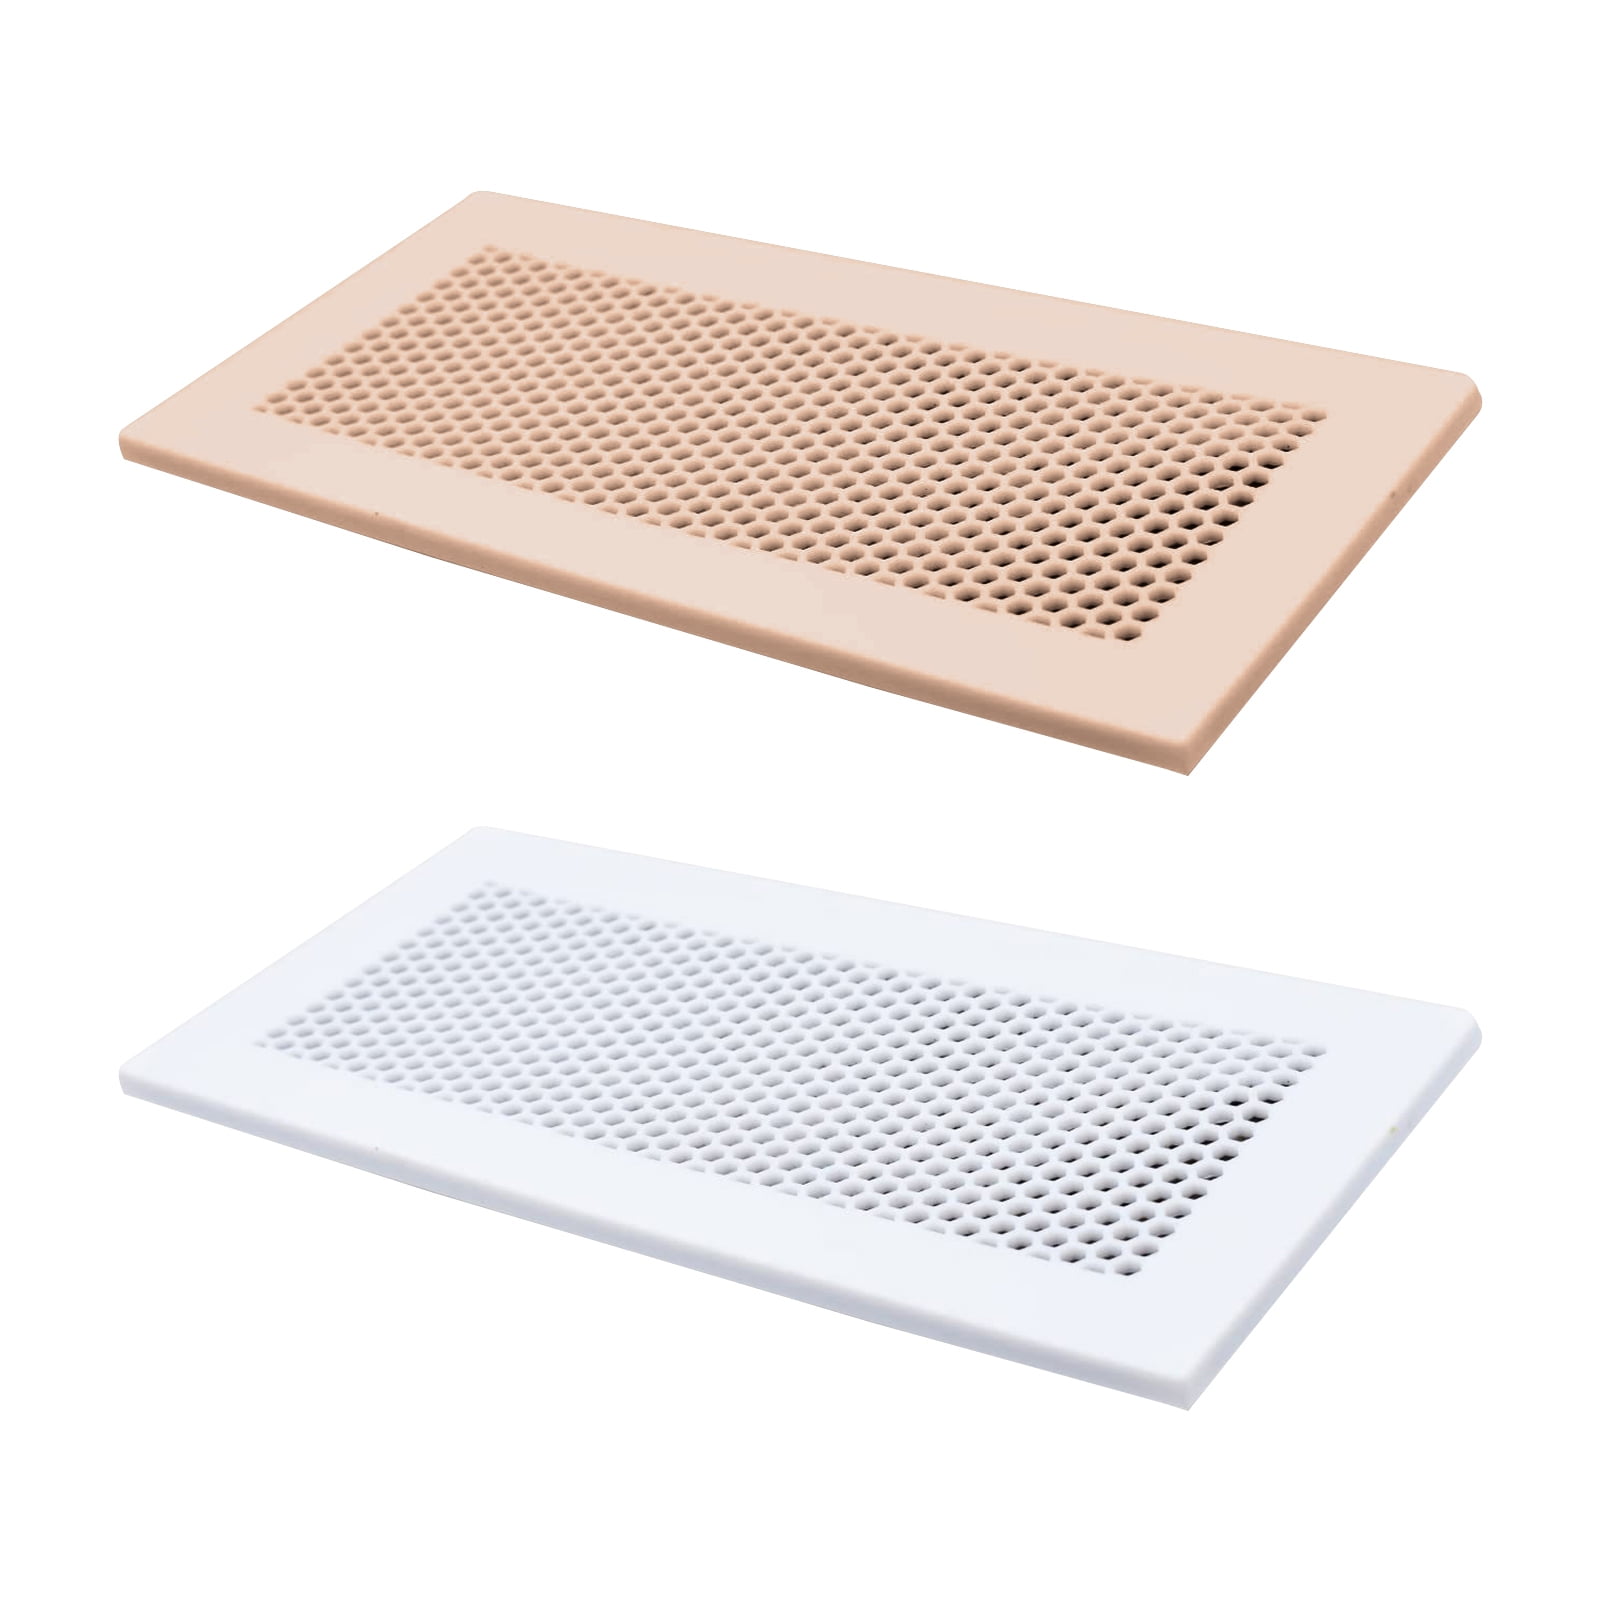 Toddler Safety Floor Vent Cover Proofing Silicone Floor Vent Covers 2Pieces